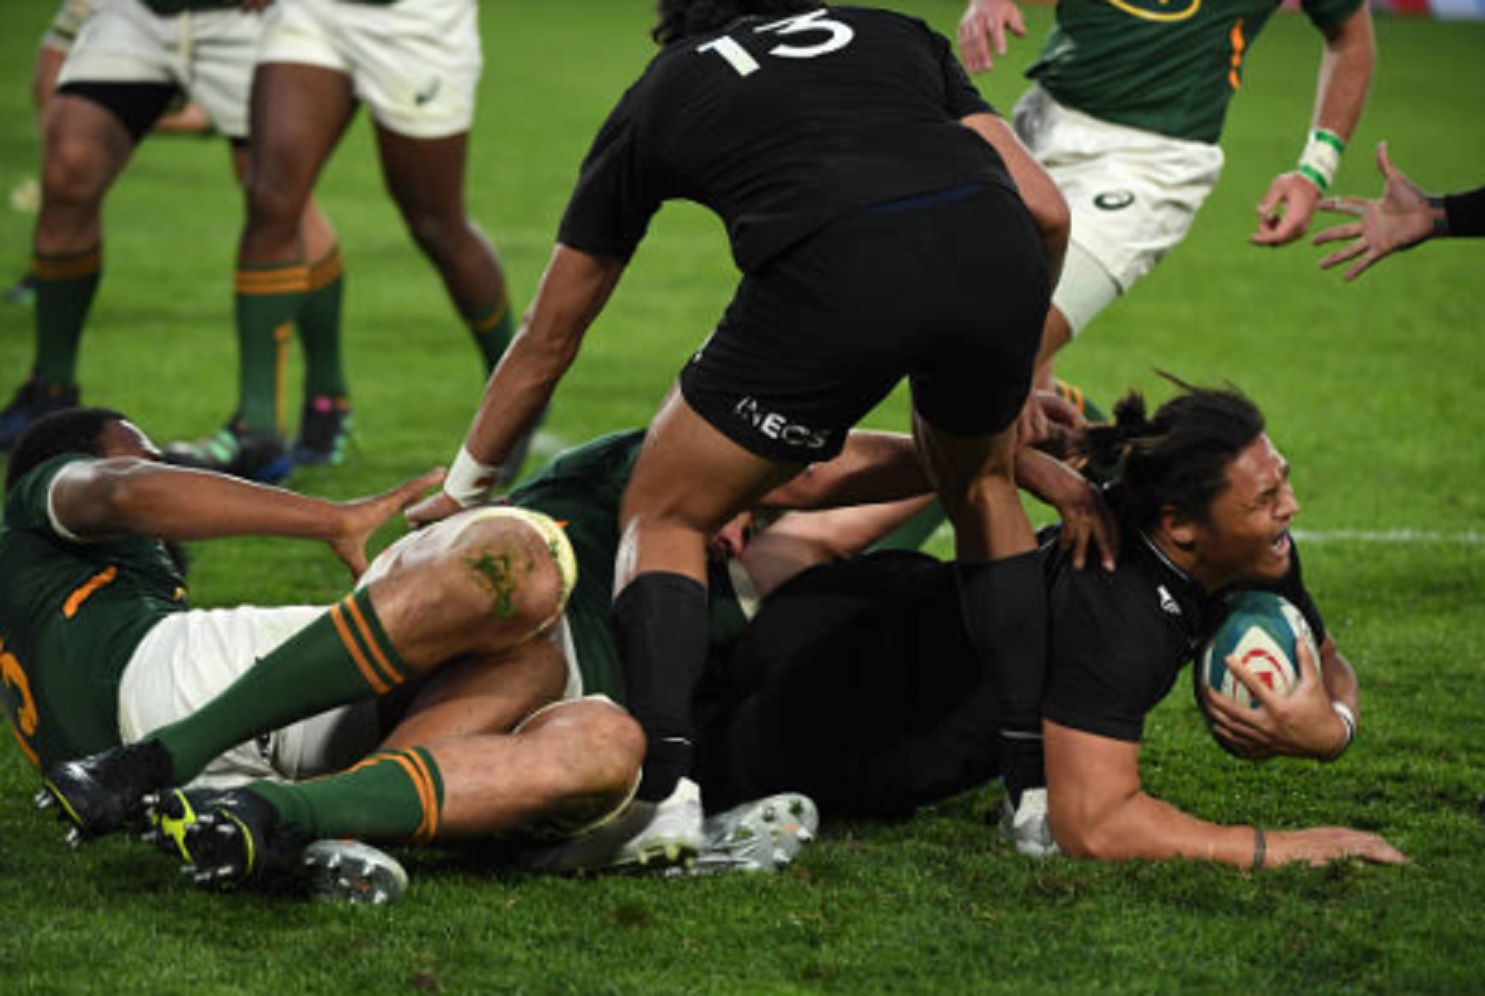 The All-Blacks send a strong message to France’s XV!